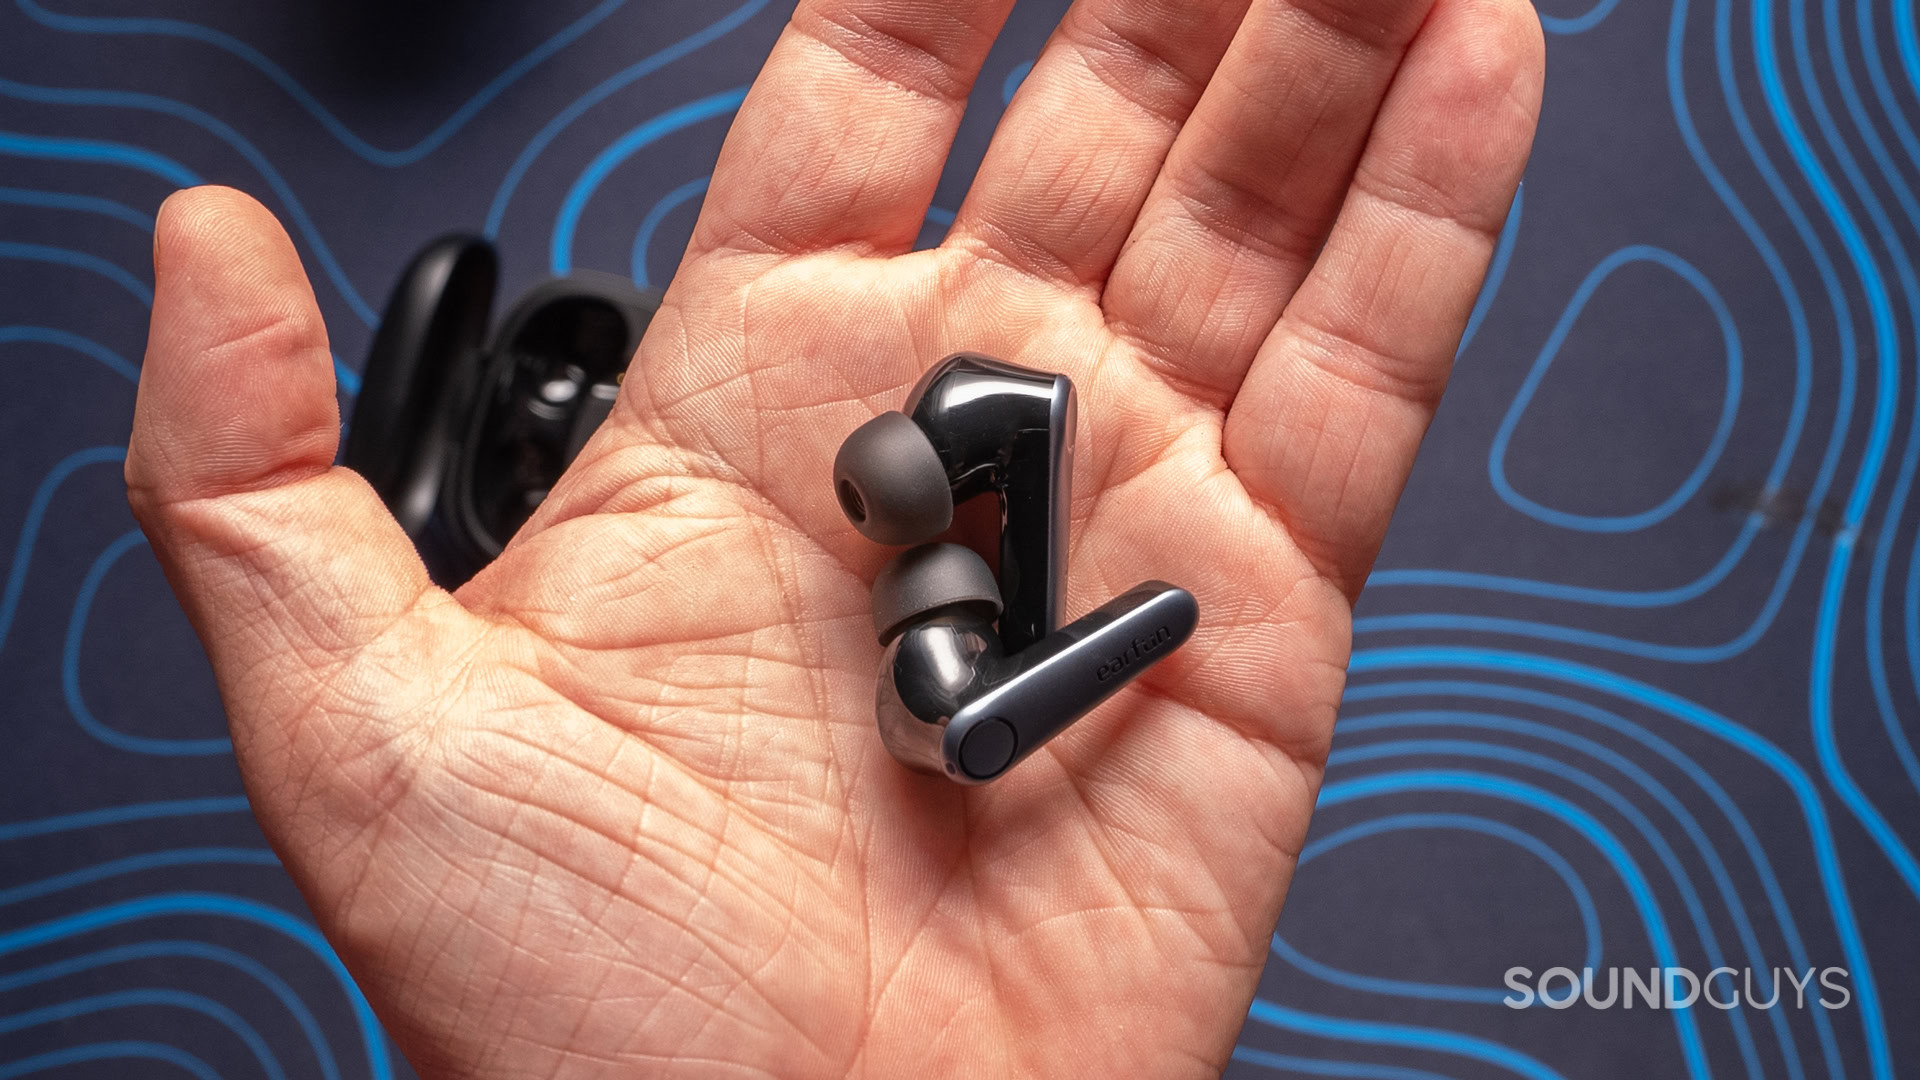 A photo of the EarFun Air Pro 3 earbuds in someone's hand.